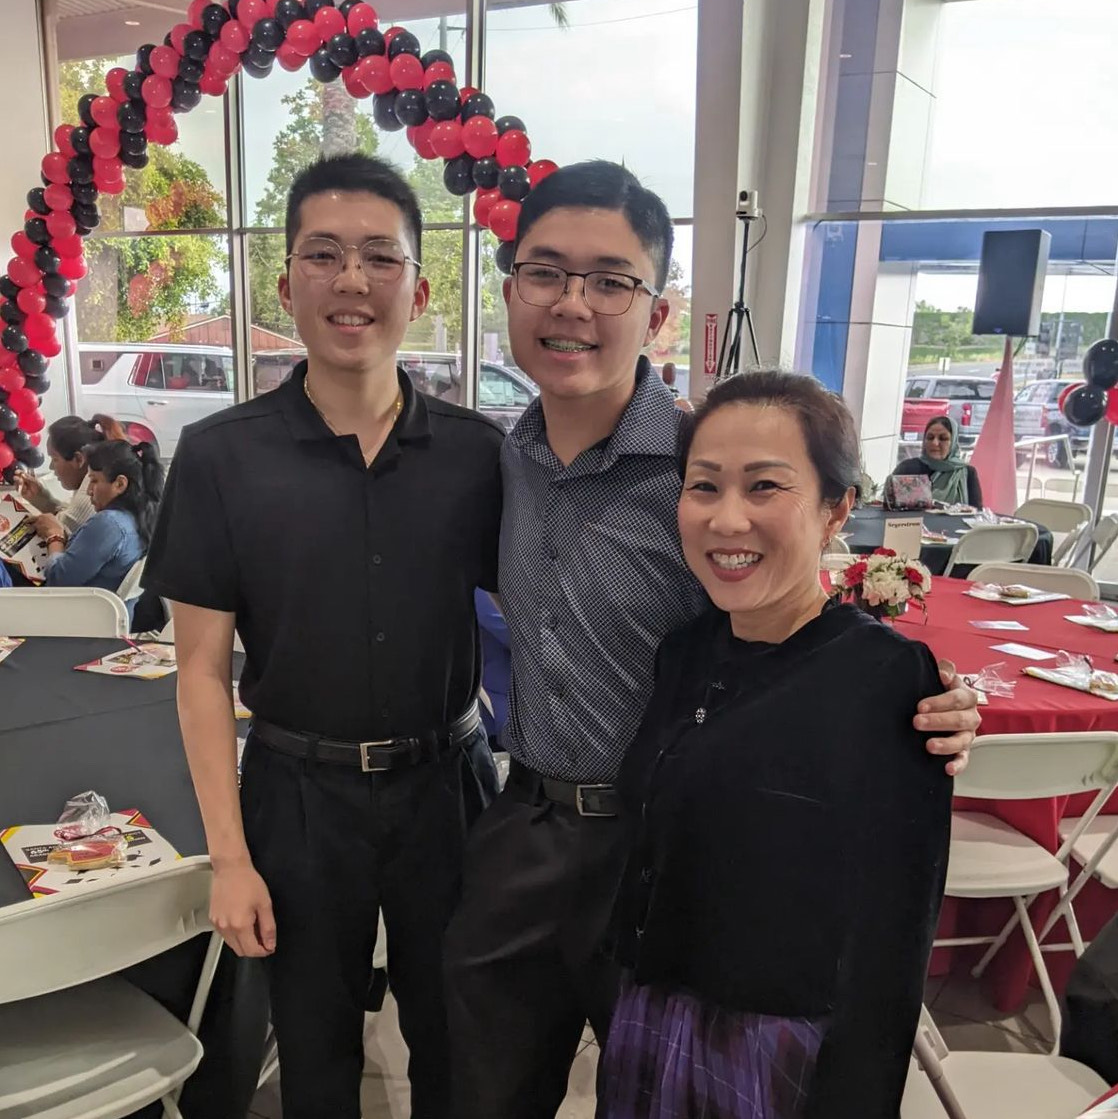 Joshua Vu attending the 100 Student Scholars at the district with his family.